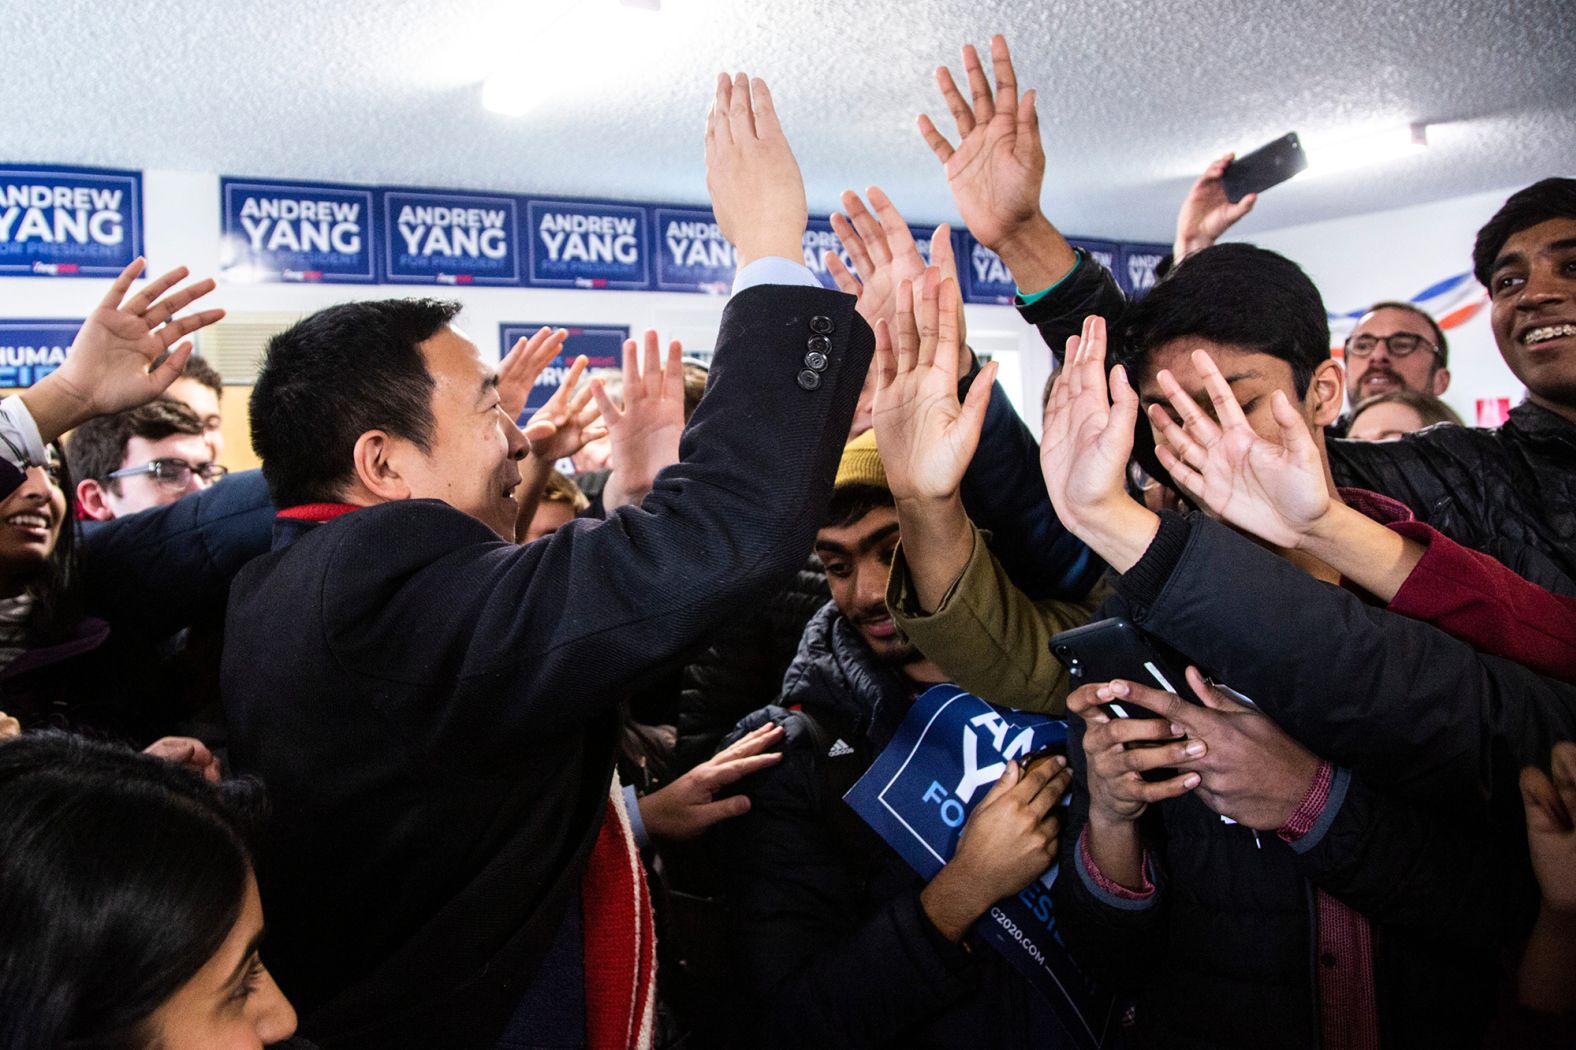 Andrew Yang high-fives supporters at a canvass launch in Iowa City, Iowa, on February 3.